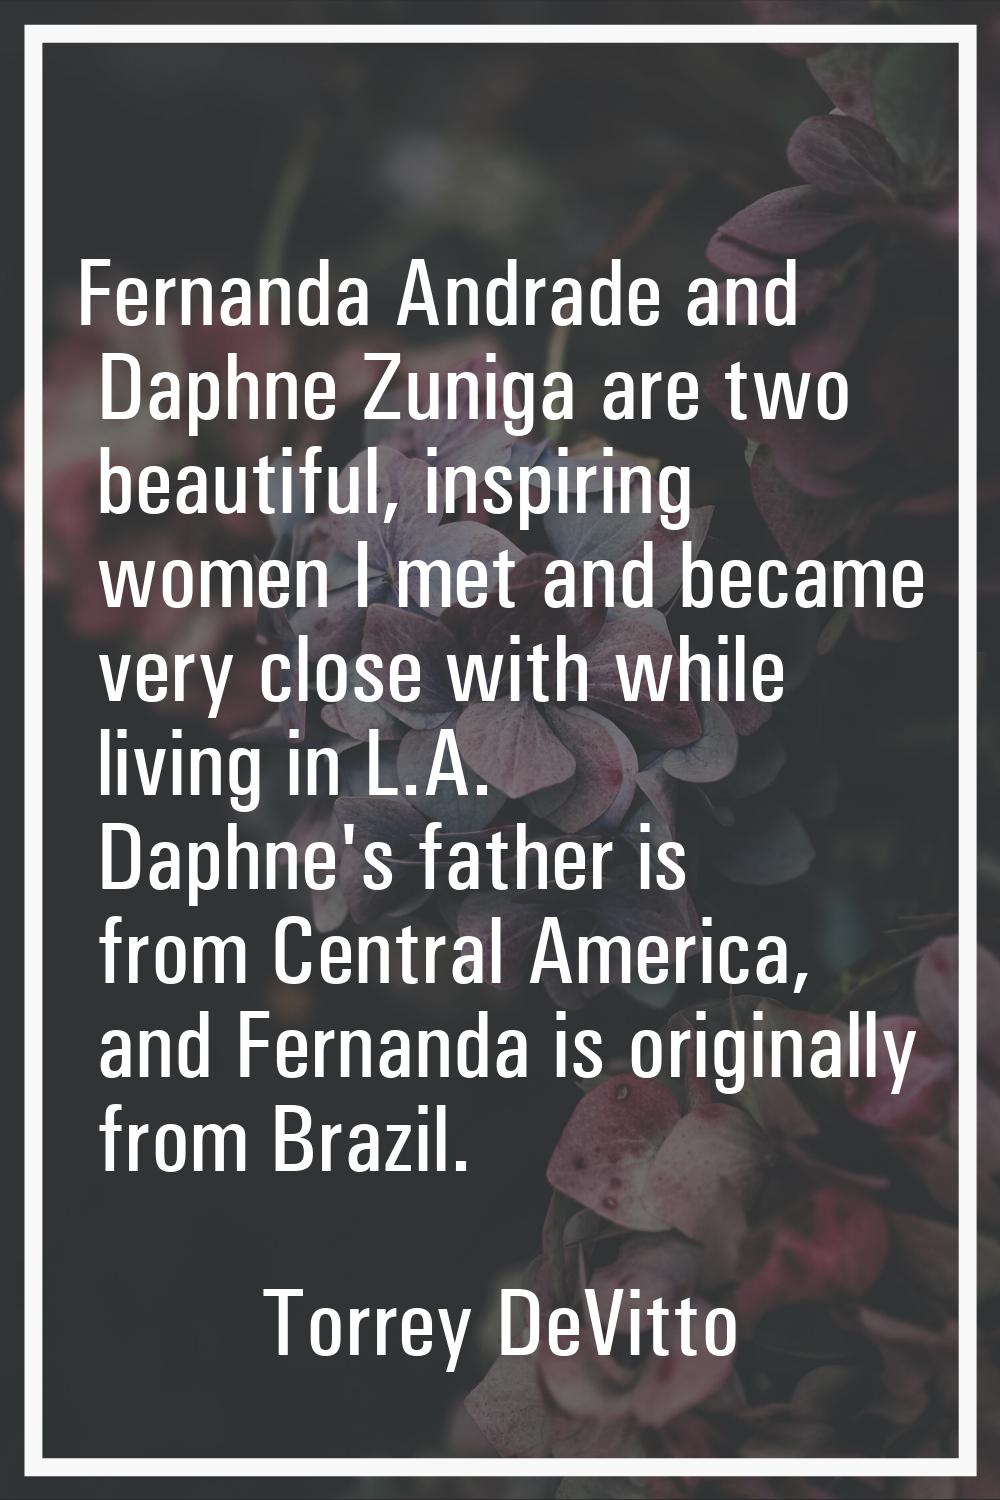 Fernanda Andrade and Daphne Zuniga are two beautiful, inspiring women I met and became very close w